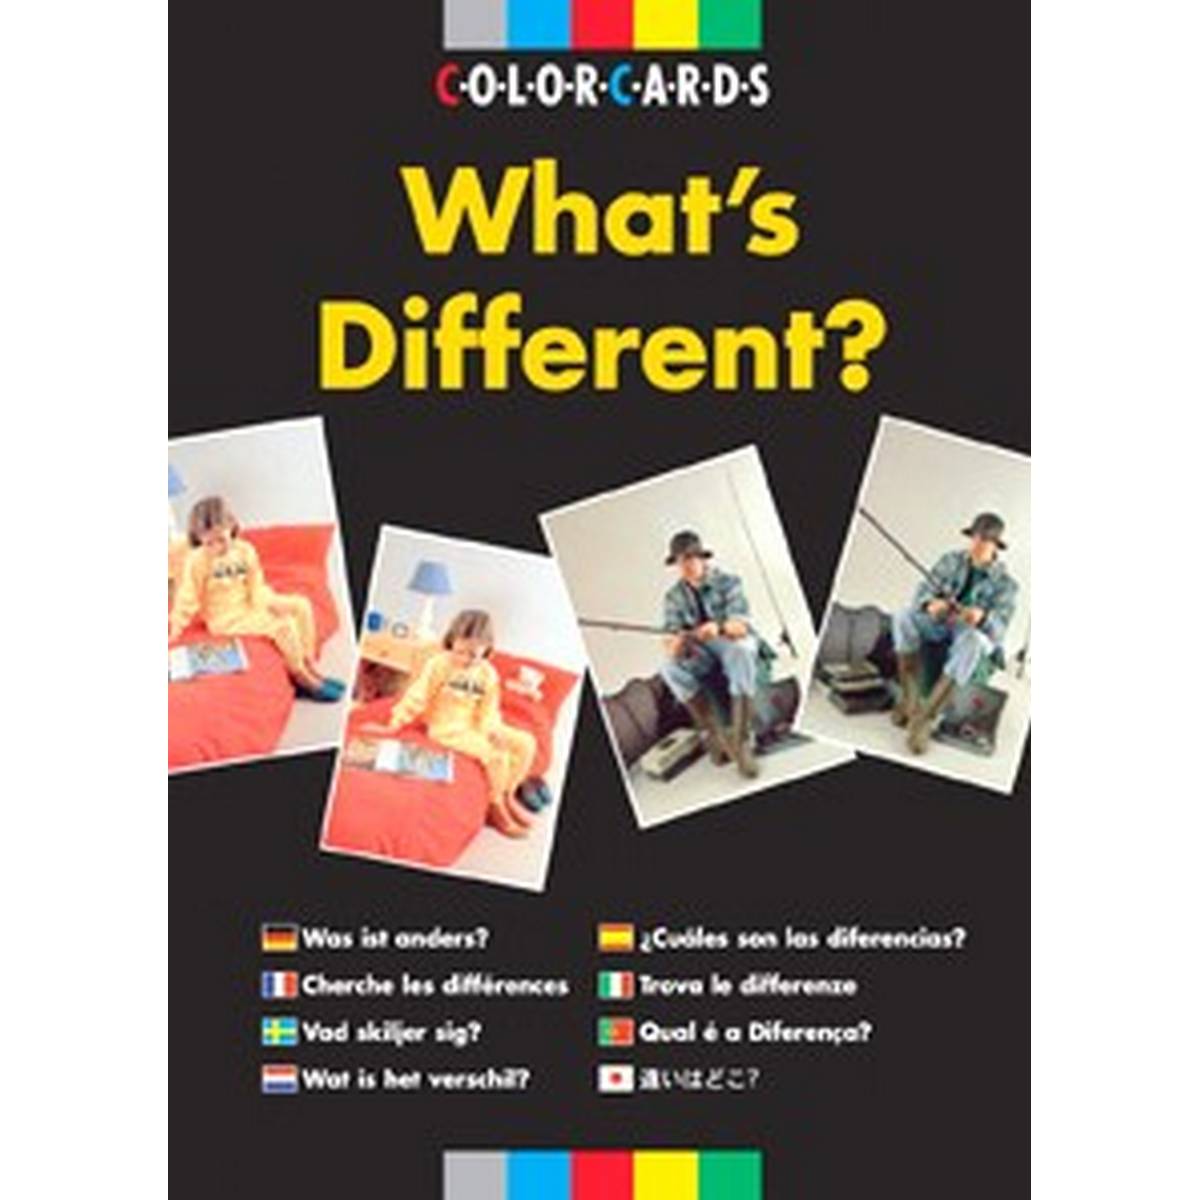 ColorCards: What's Different?